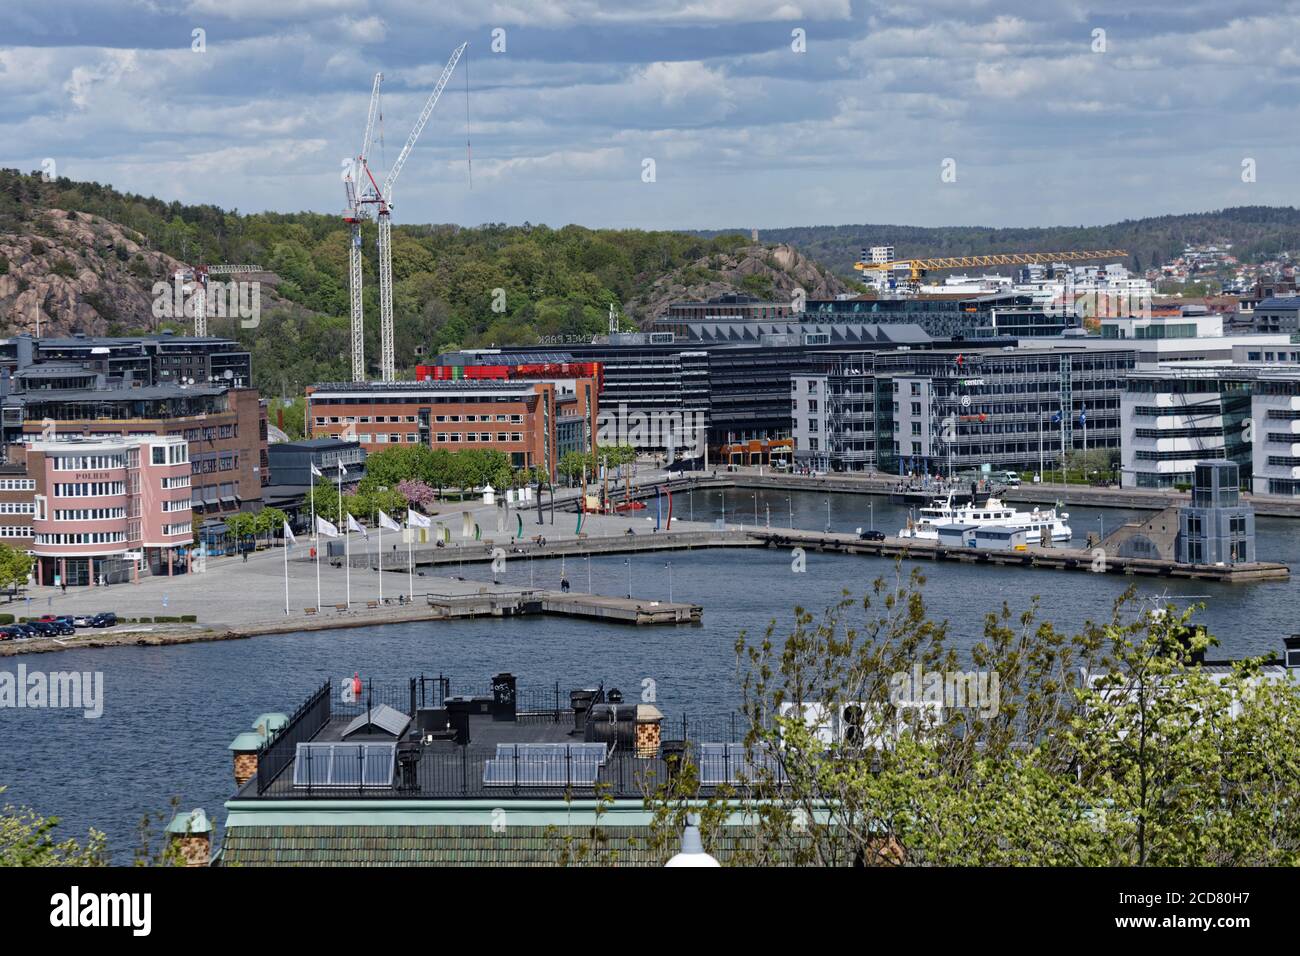 Aerial view to Lindholmen Science Park on the shore of Göta älv river in Gothenburg, Sweden Stock Photo